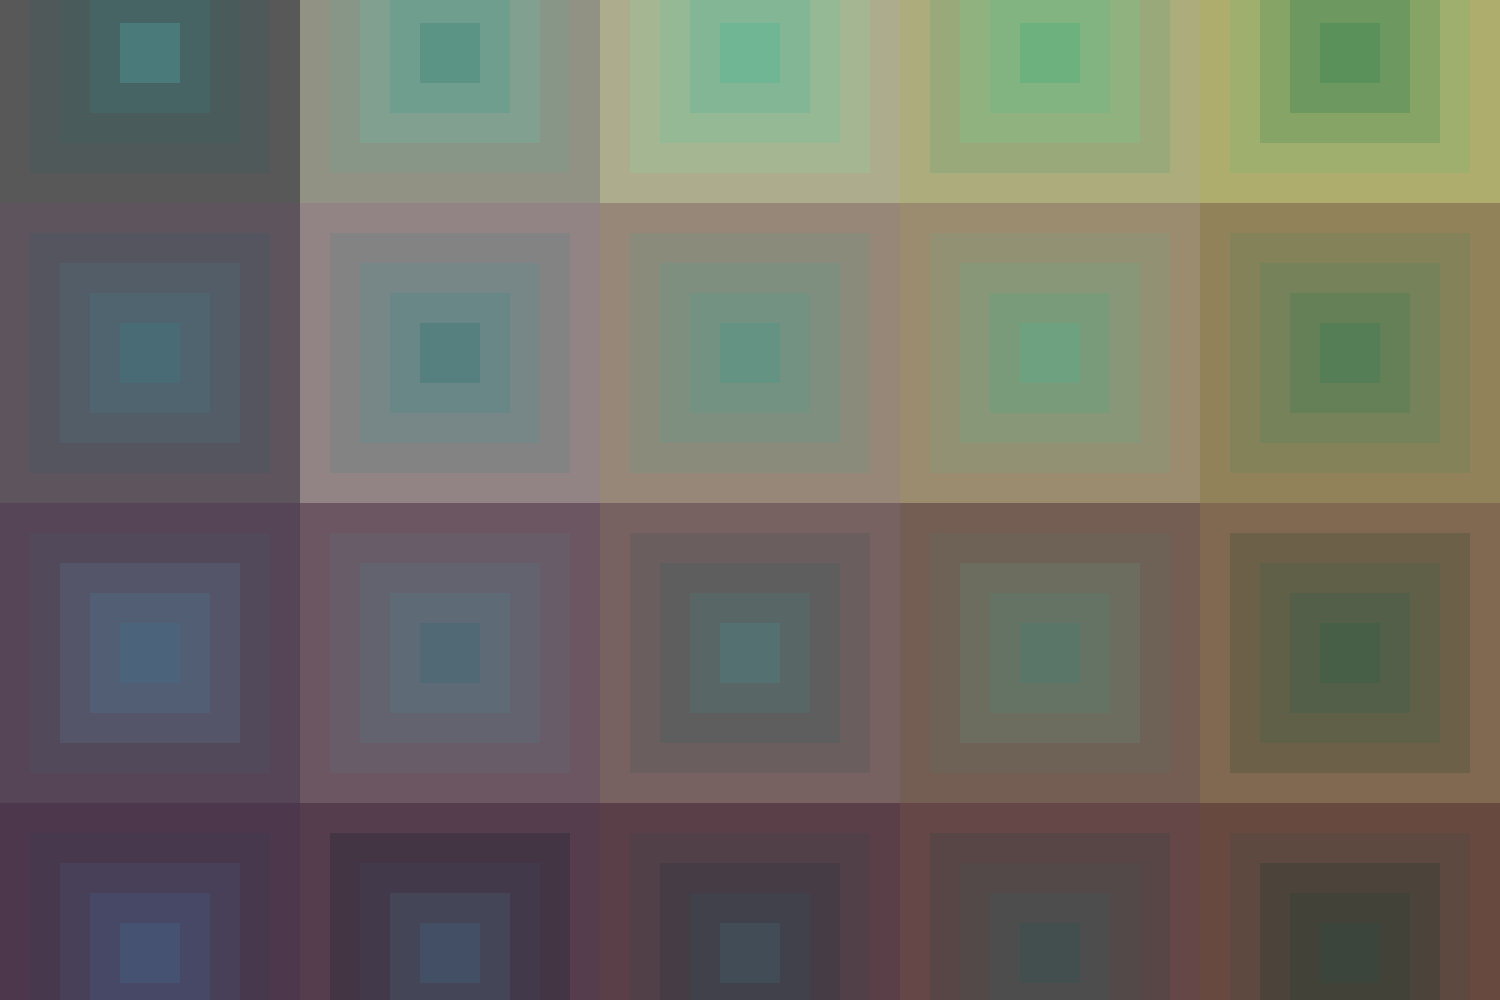 A grid of square pattern showcasing a multitude of colors.